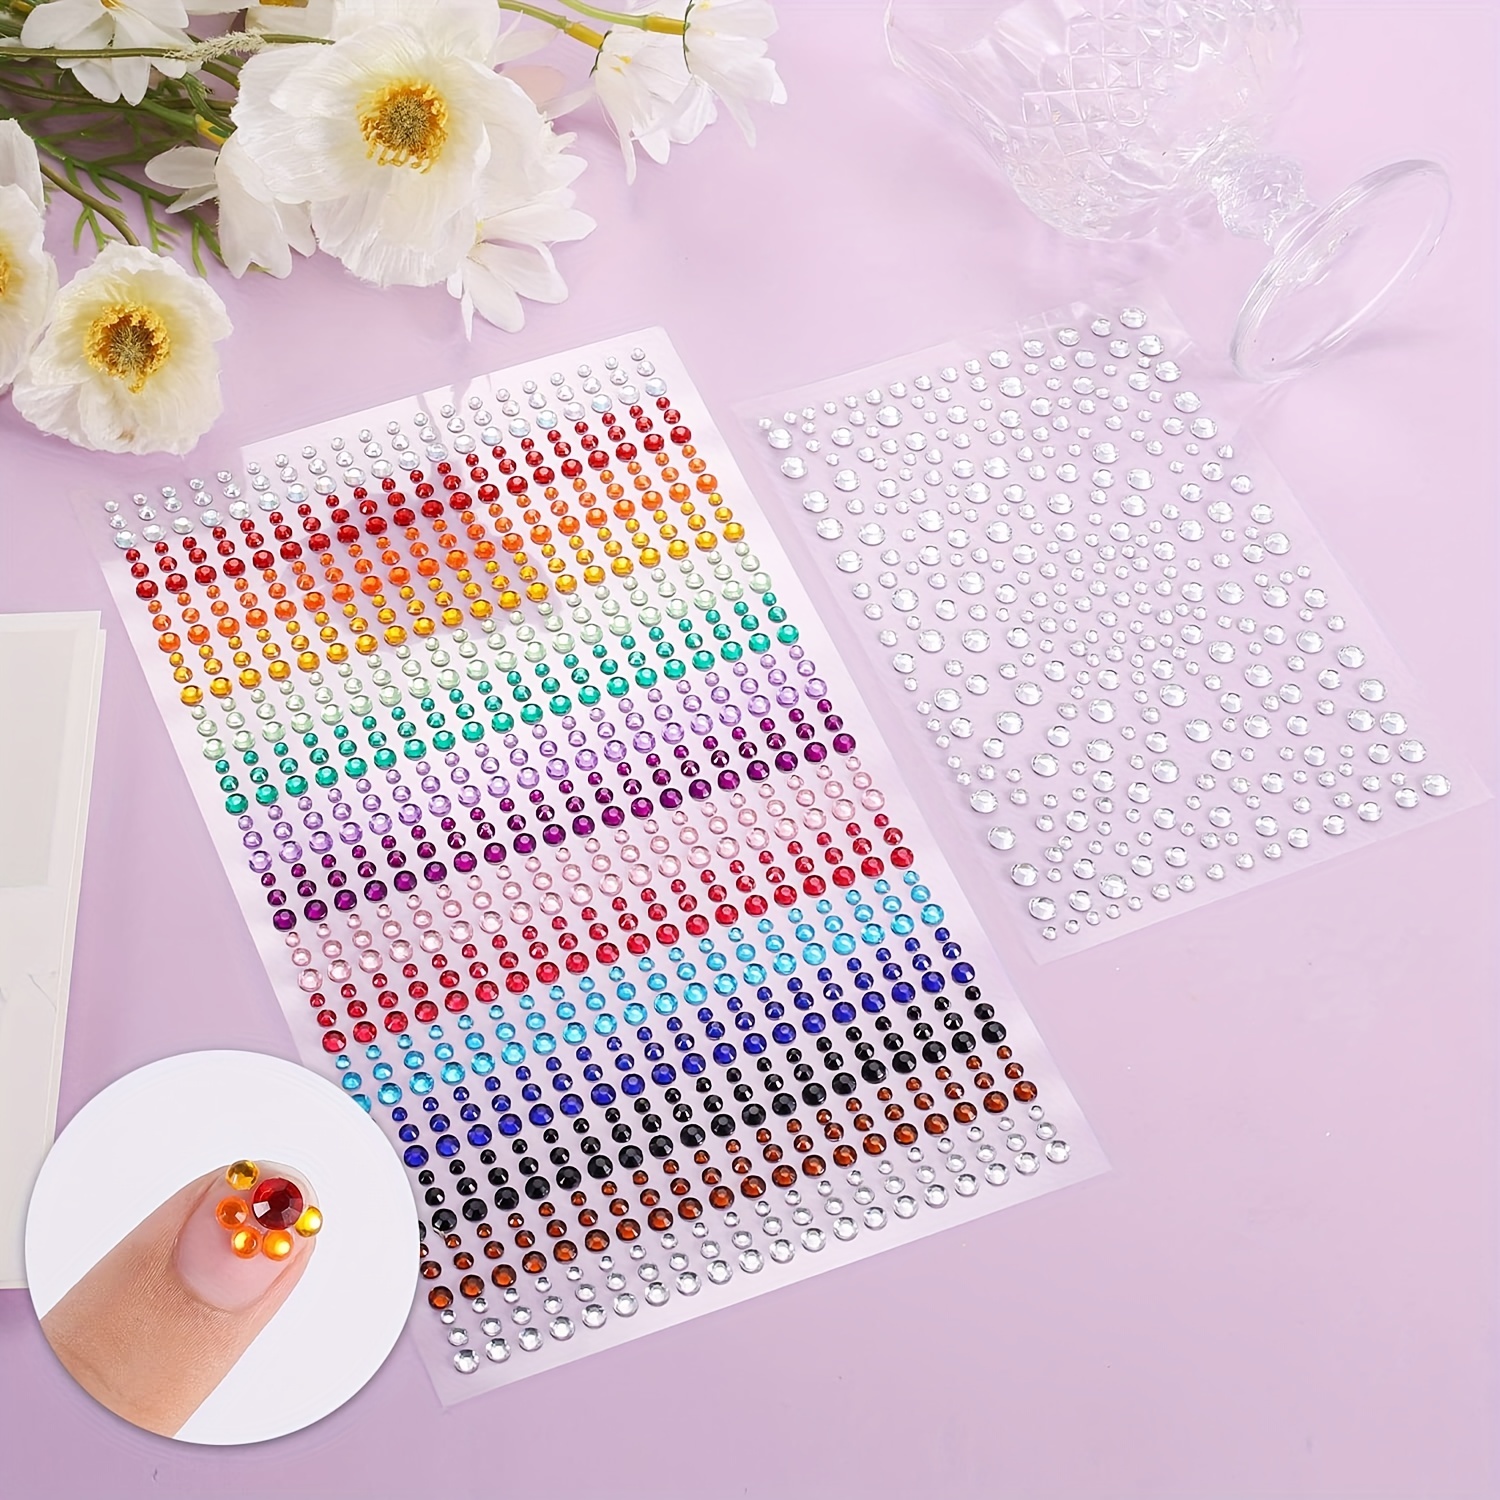 Self Adhesive Rhinestone Gem Stickers for Face Nail Body Makeup